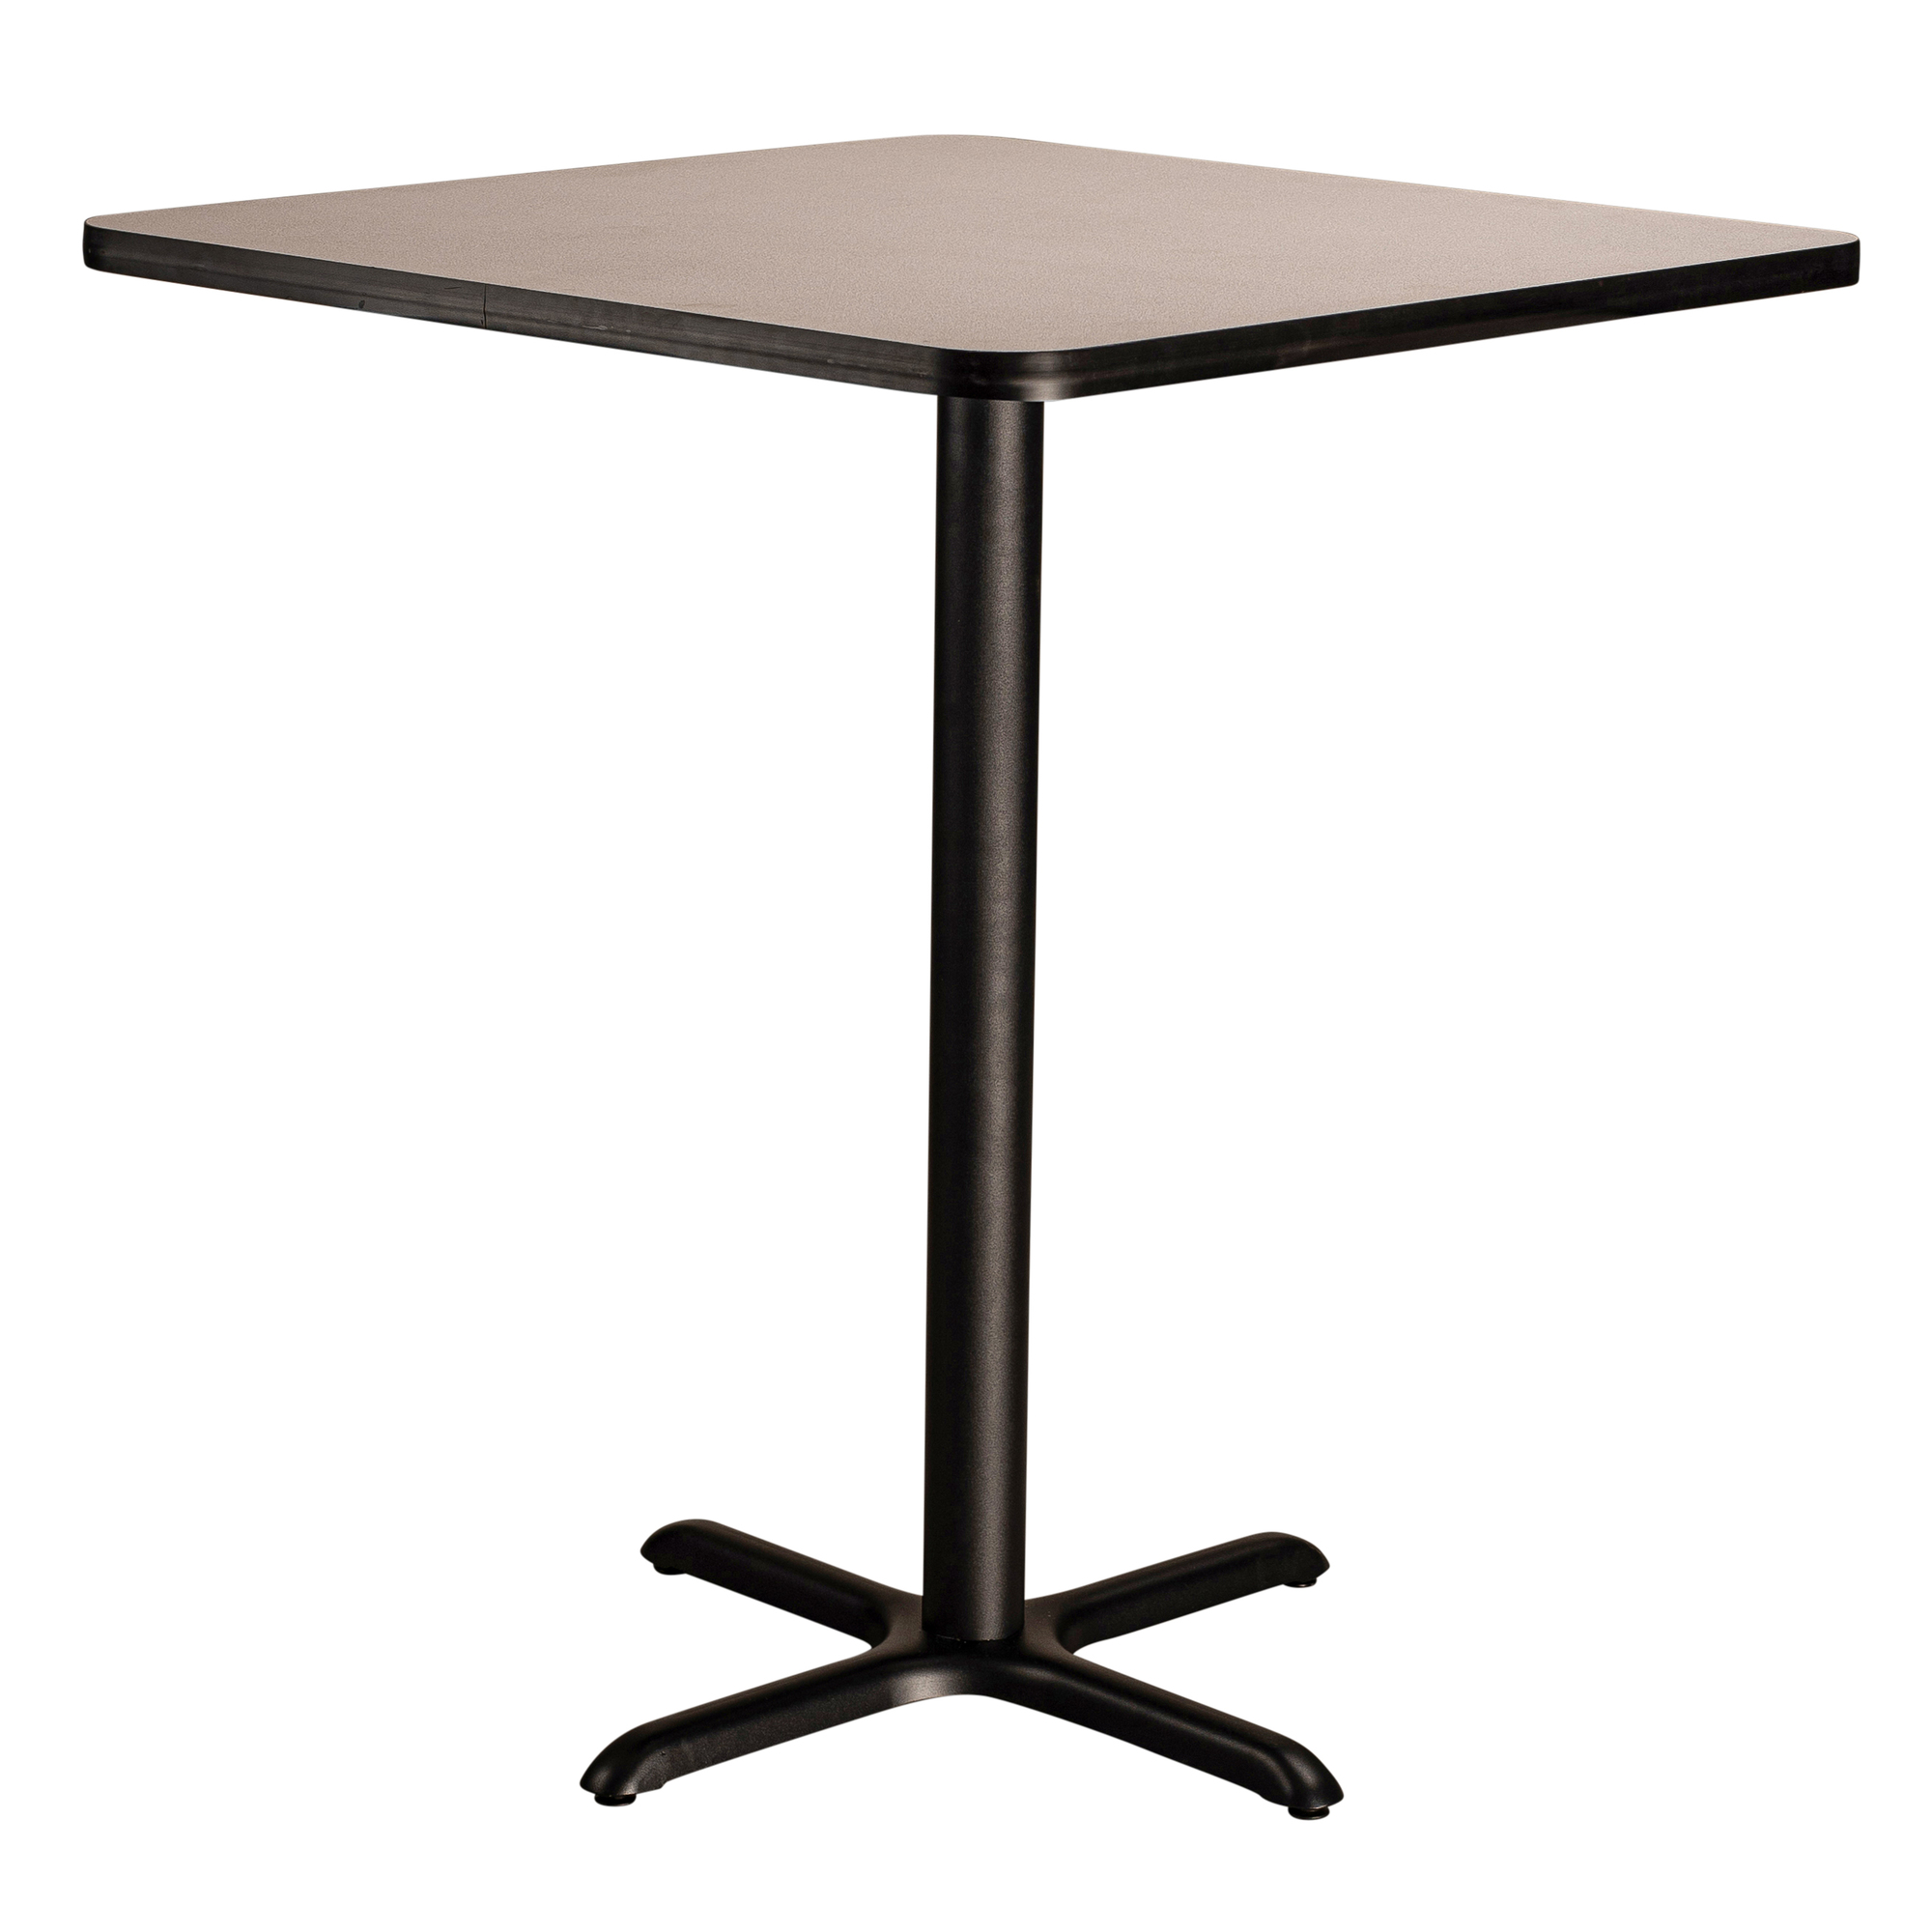 "National Public Seating, Cafe Table, 36x36x30 Square ""X"" Base, Height 30 in, Model CT33636XDPBTMGY"